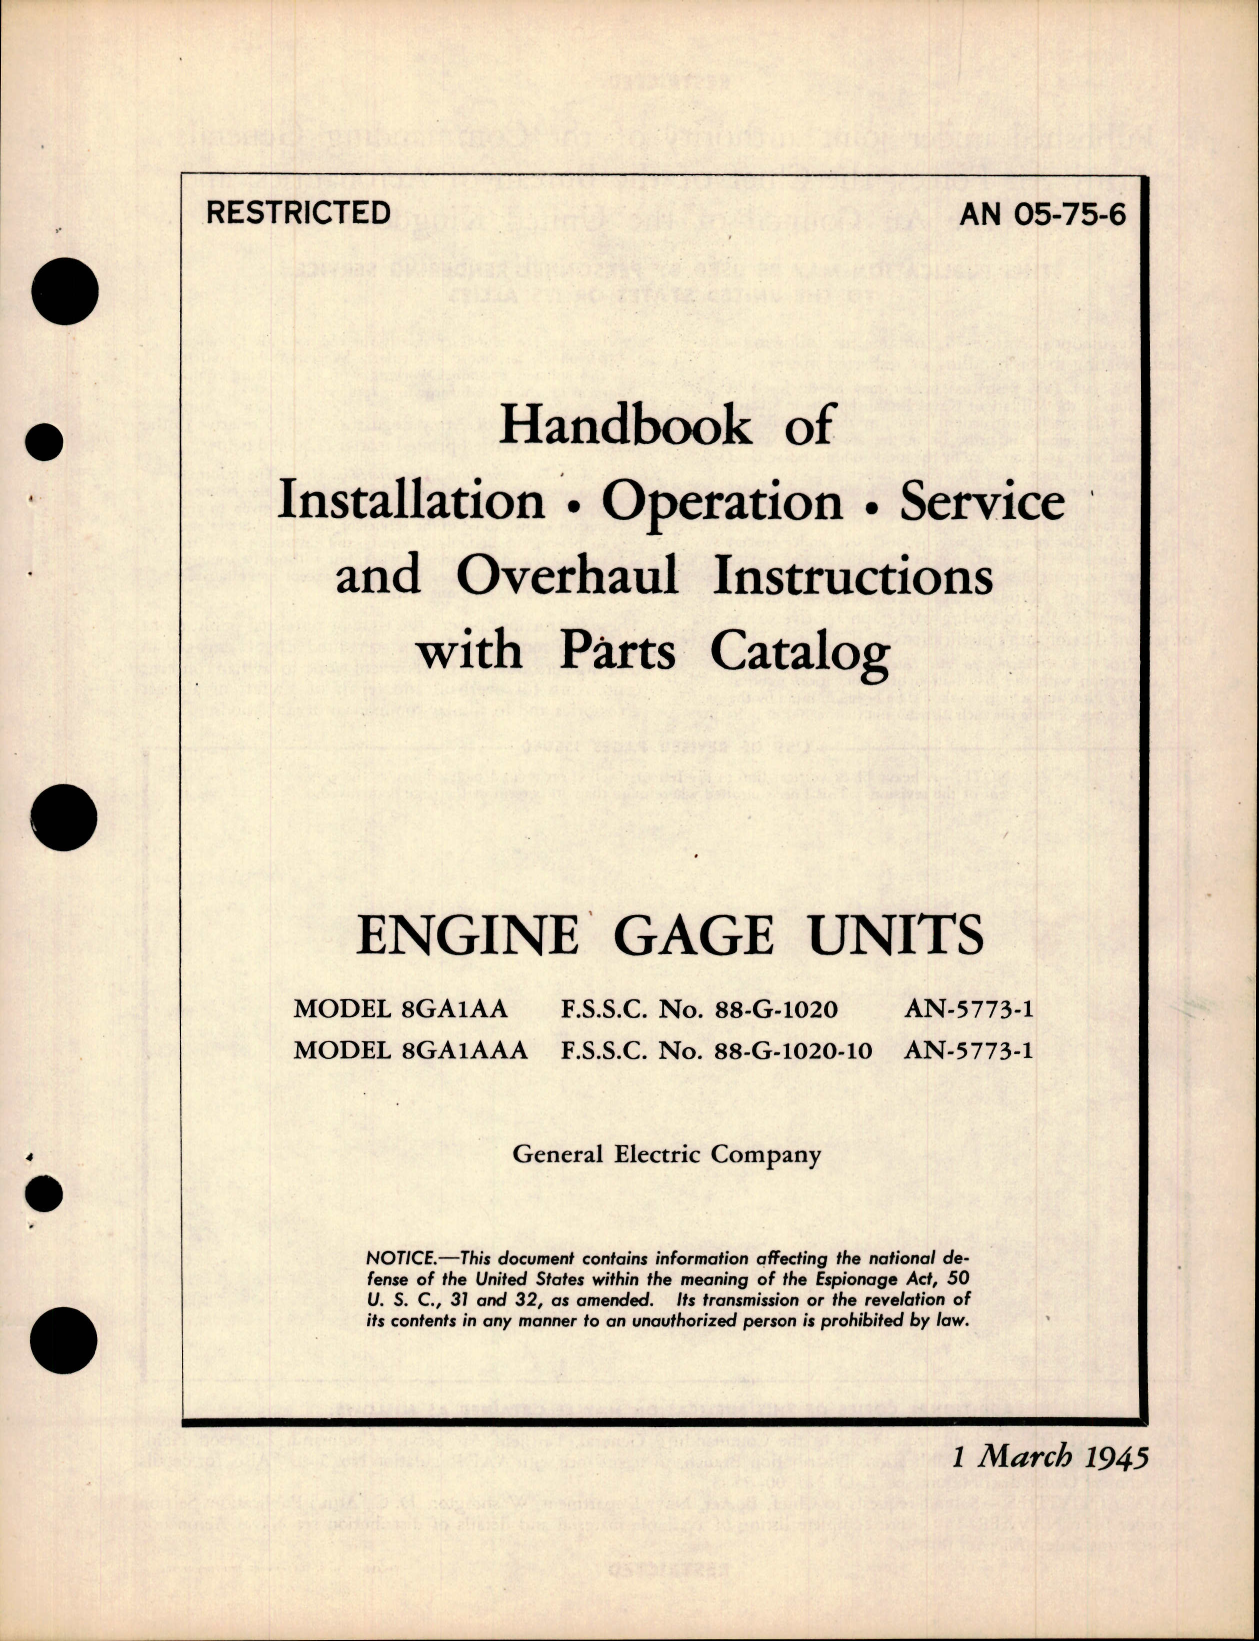 Sample page 1 from AirCorps Library document: Handbook of Installation, Operation, Service, and Overhaul Instructions with Parts Catalog for Engine Gage Units